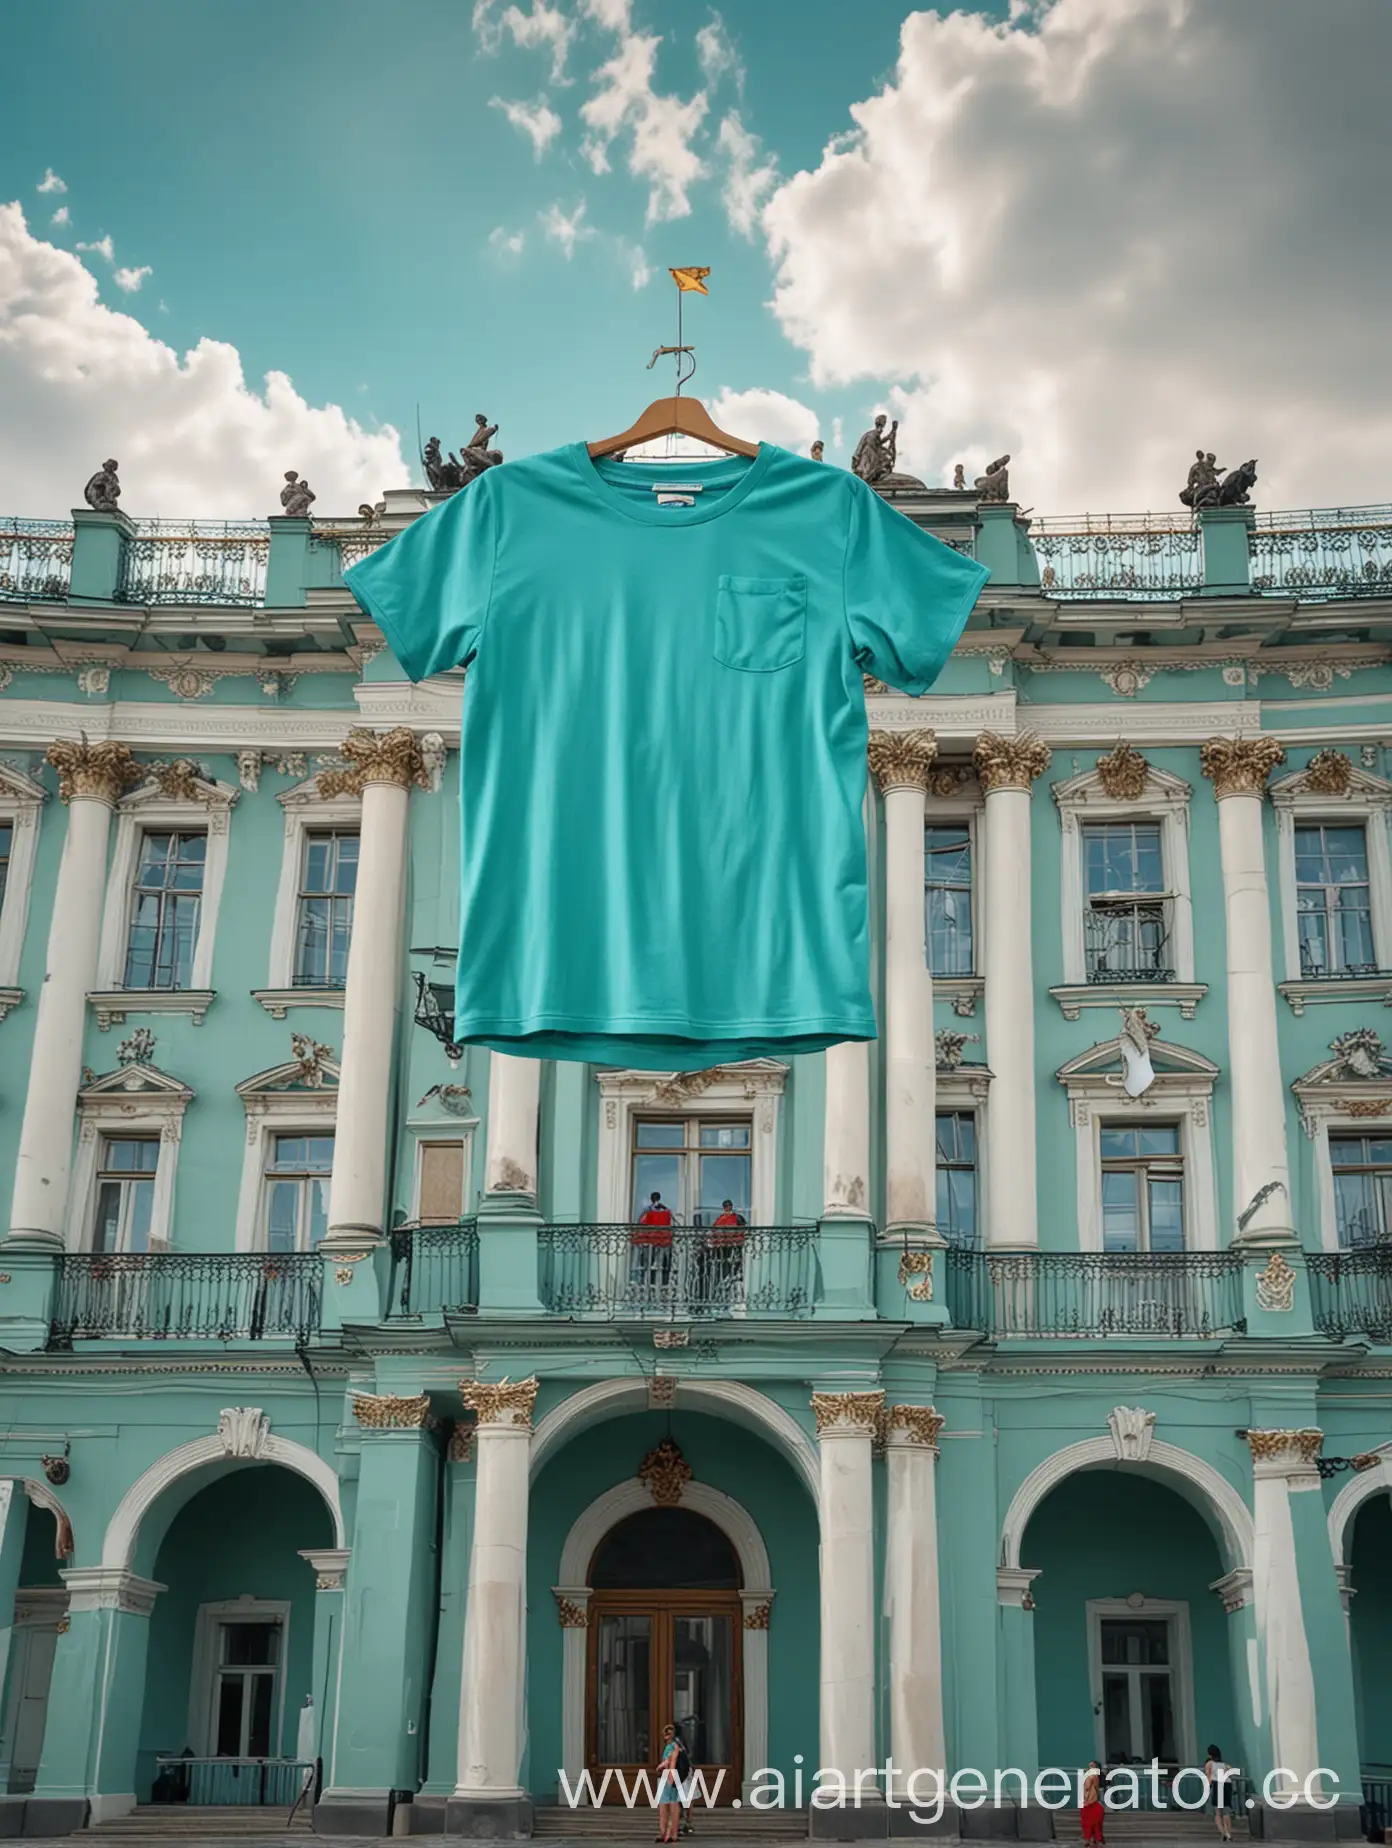 Create a huge turquoise t-shirt, the t-shirt floats on the background of the Hermitage in the air in St. Petersburg, small turquoise t-shirts fly through the sky